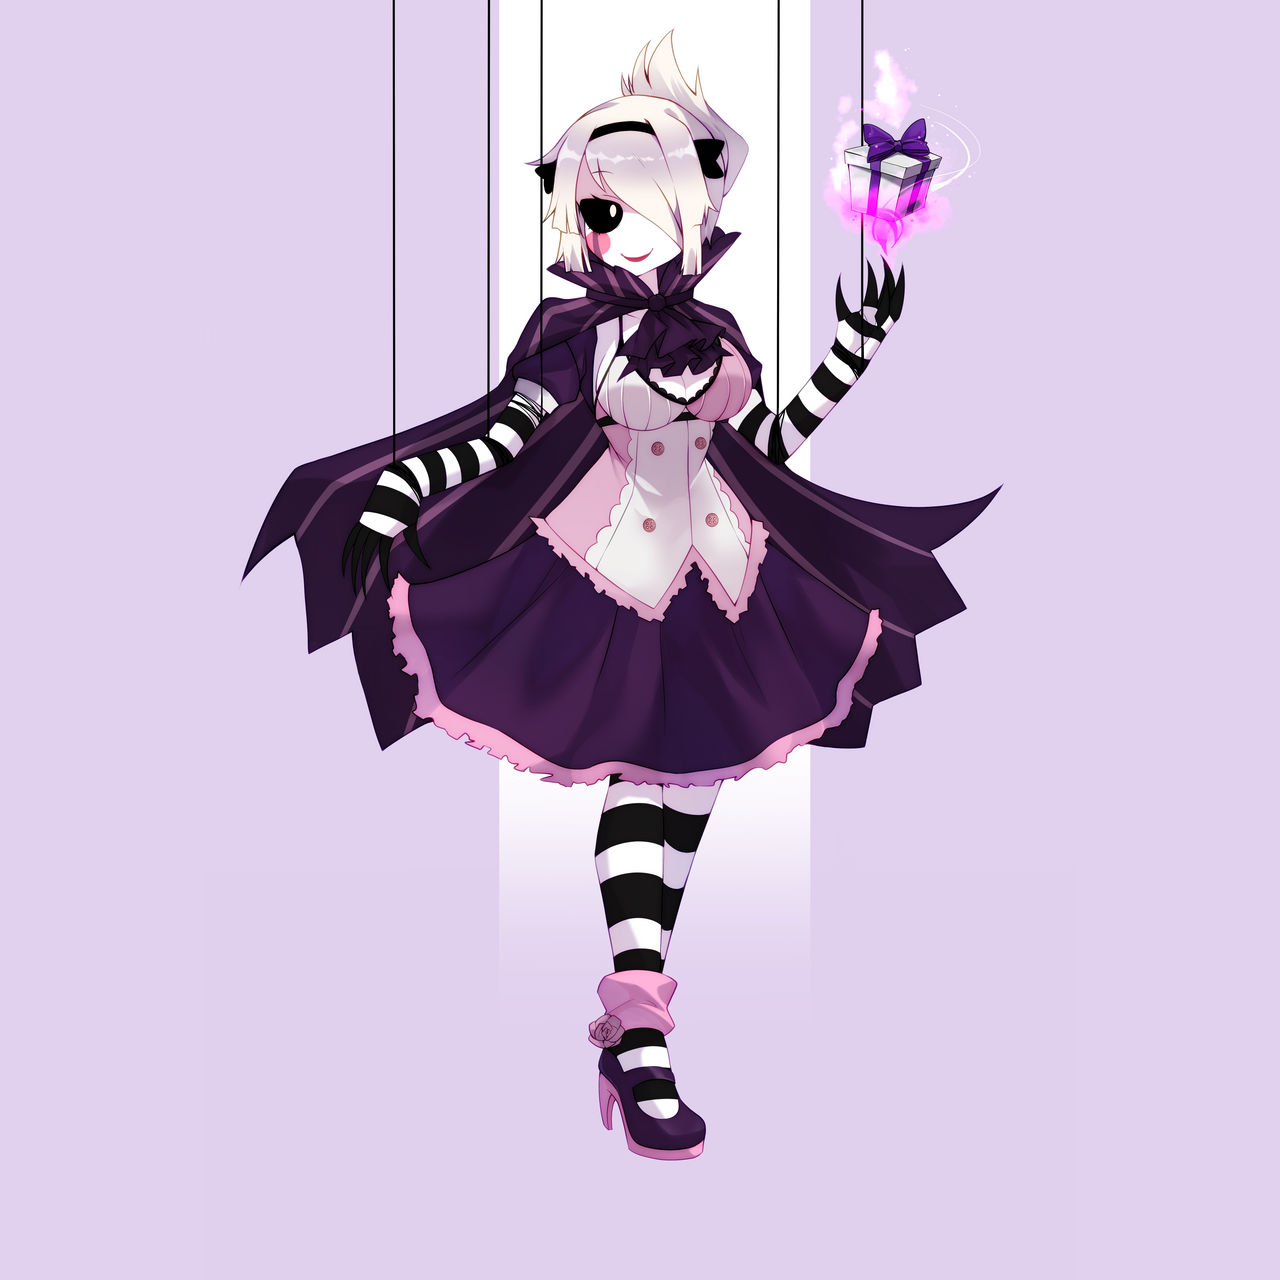 FNiA:SP - The JR's Marionette (Canon) by RealSpaceBear87 on DeviantArt